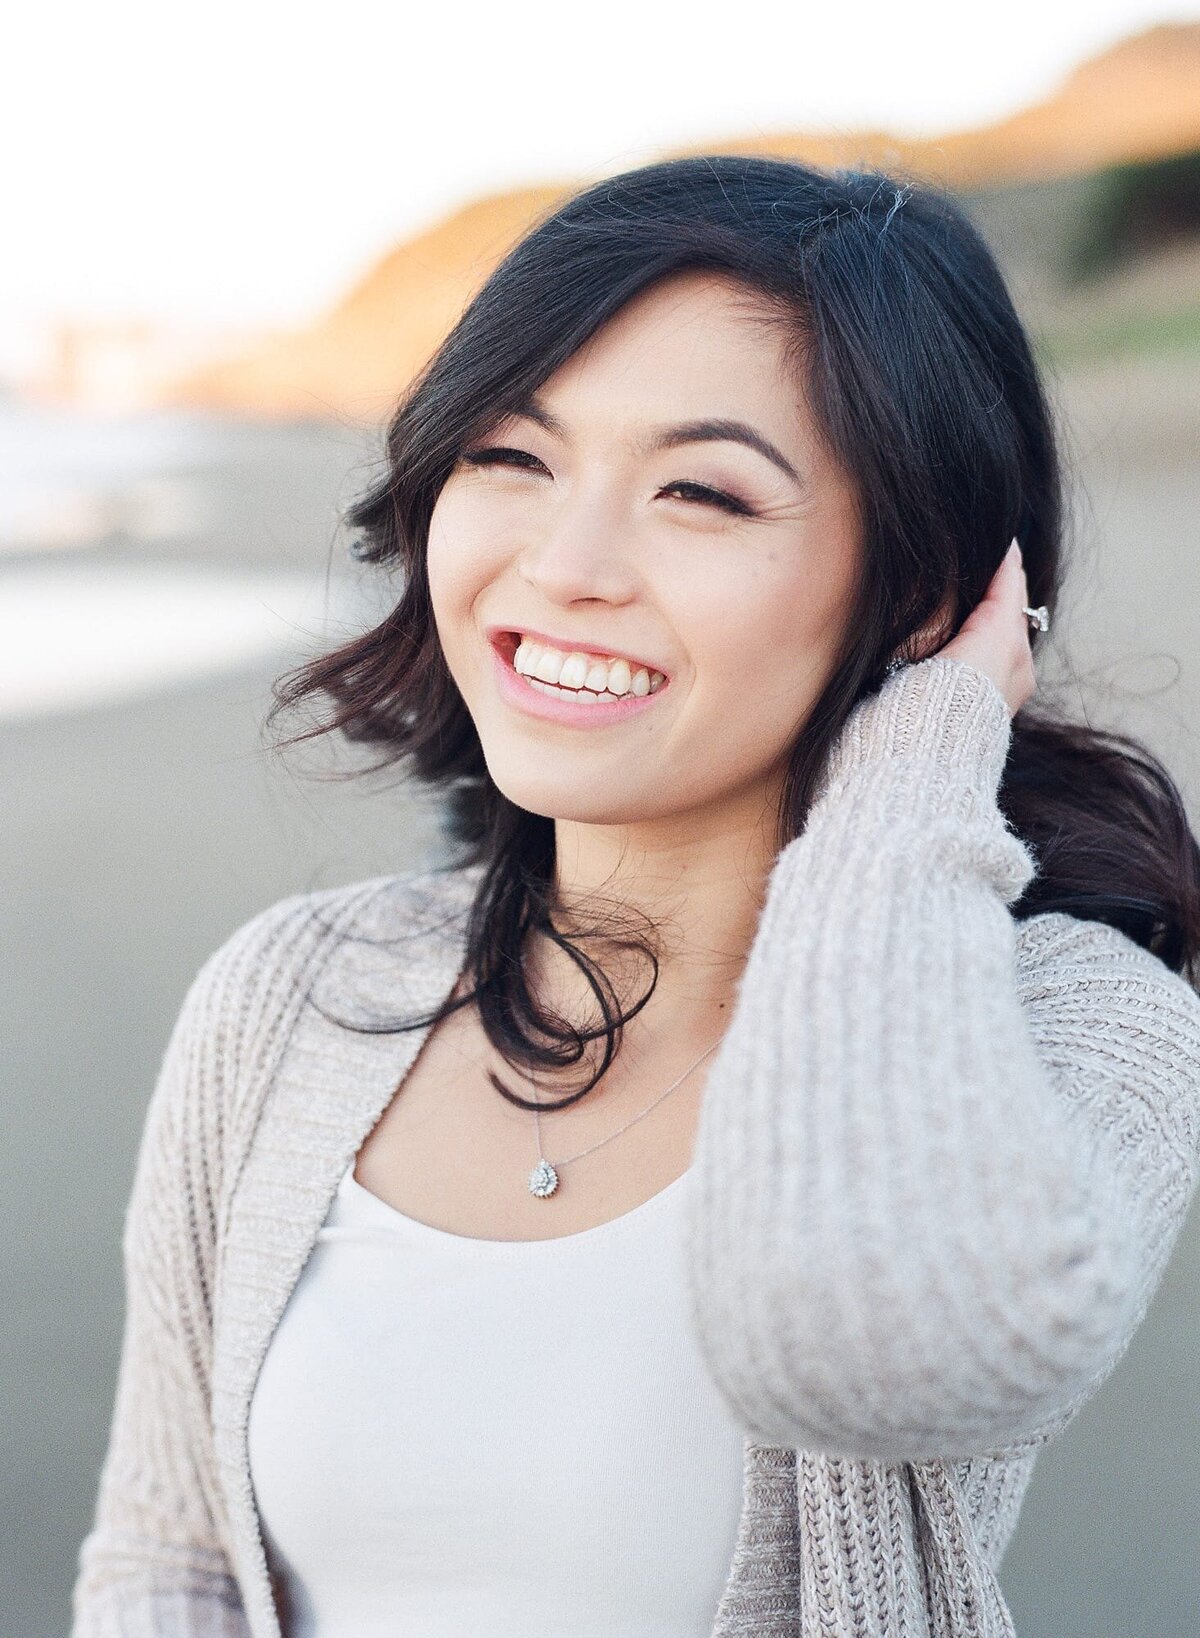 Ethnically Asian lady with black hair wearing a pendant smiles and poses at the beach.